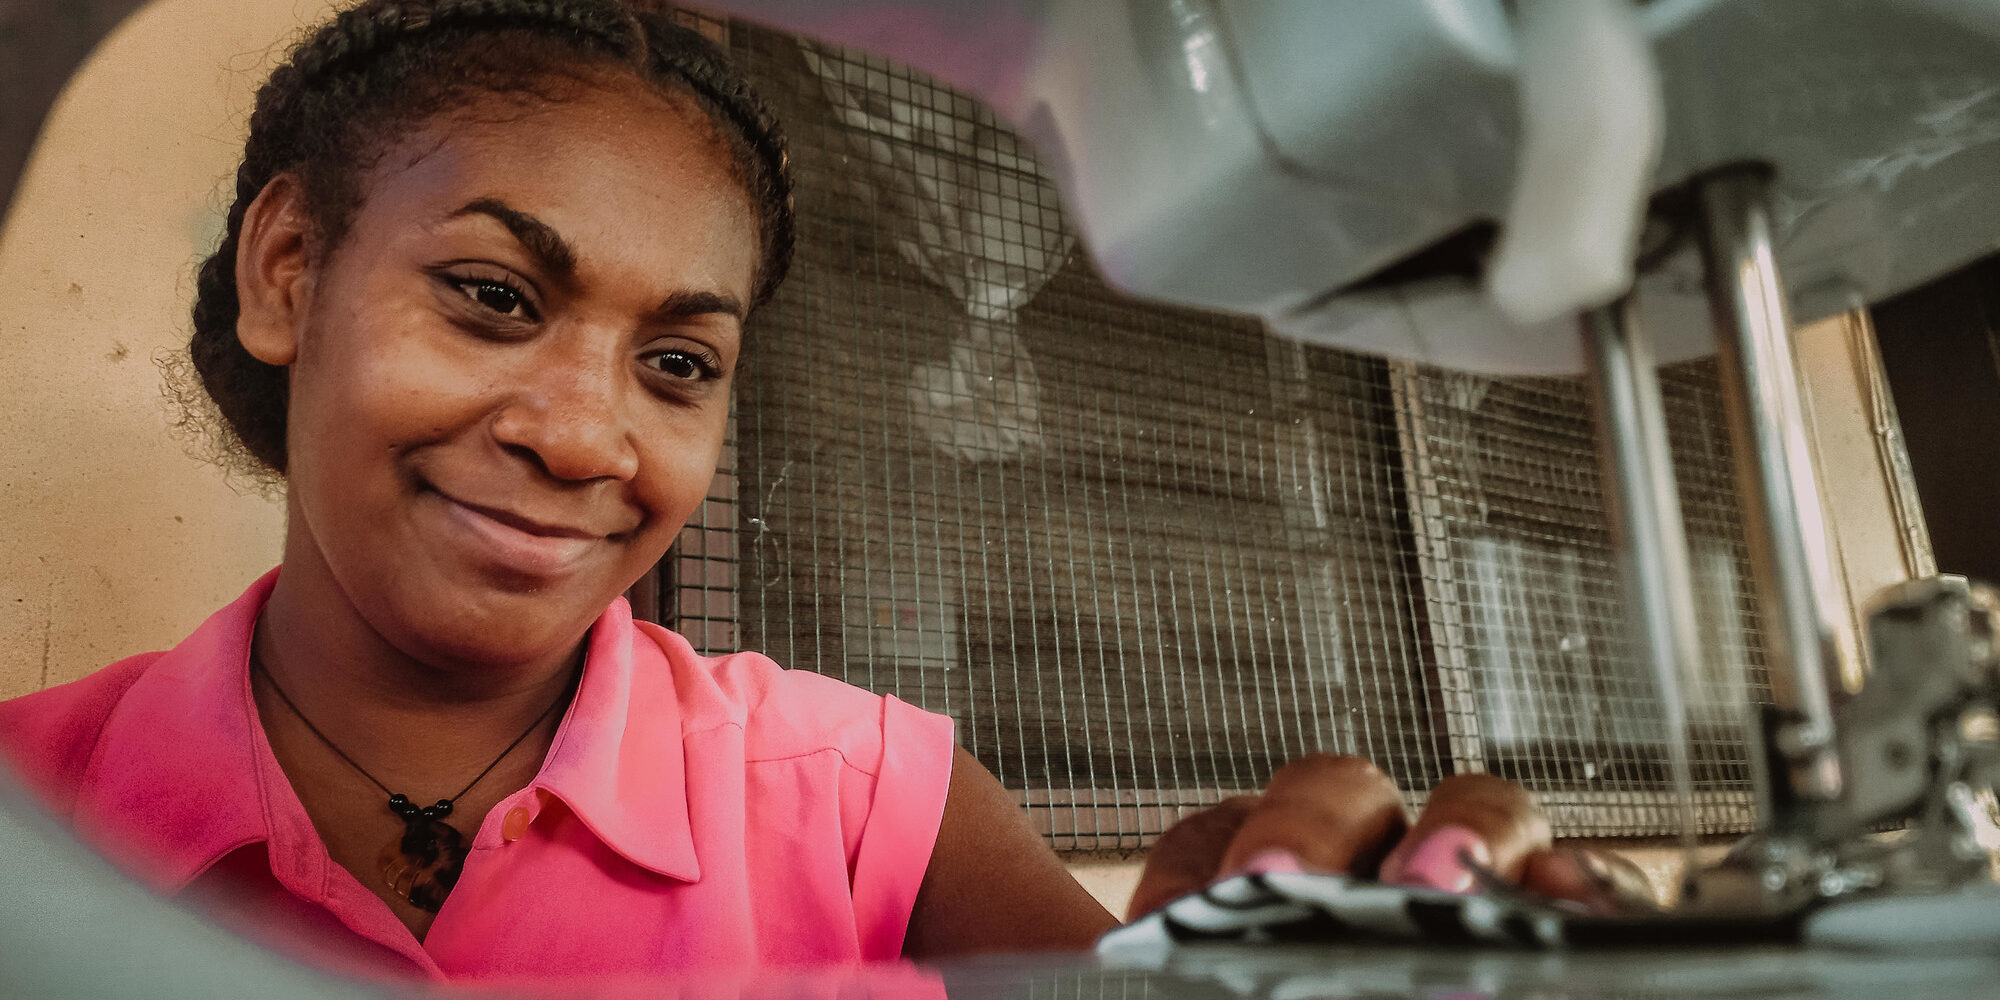 Regina smiling as she sits at her sewing machine. Valerie Fernandez/CARE